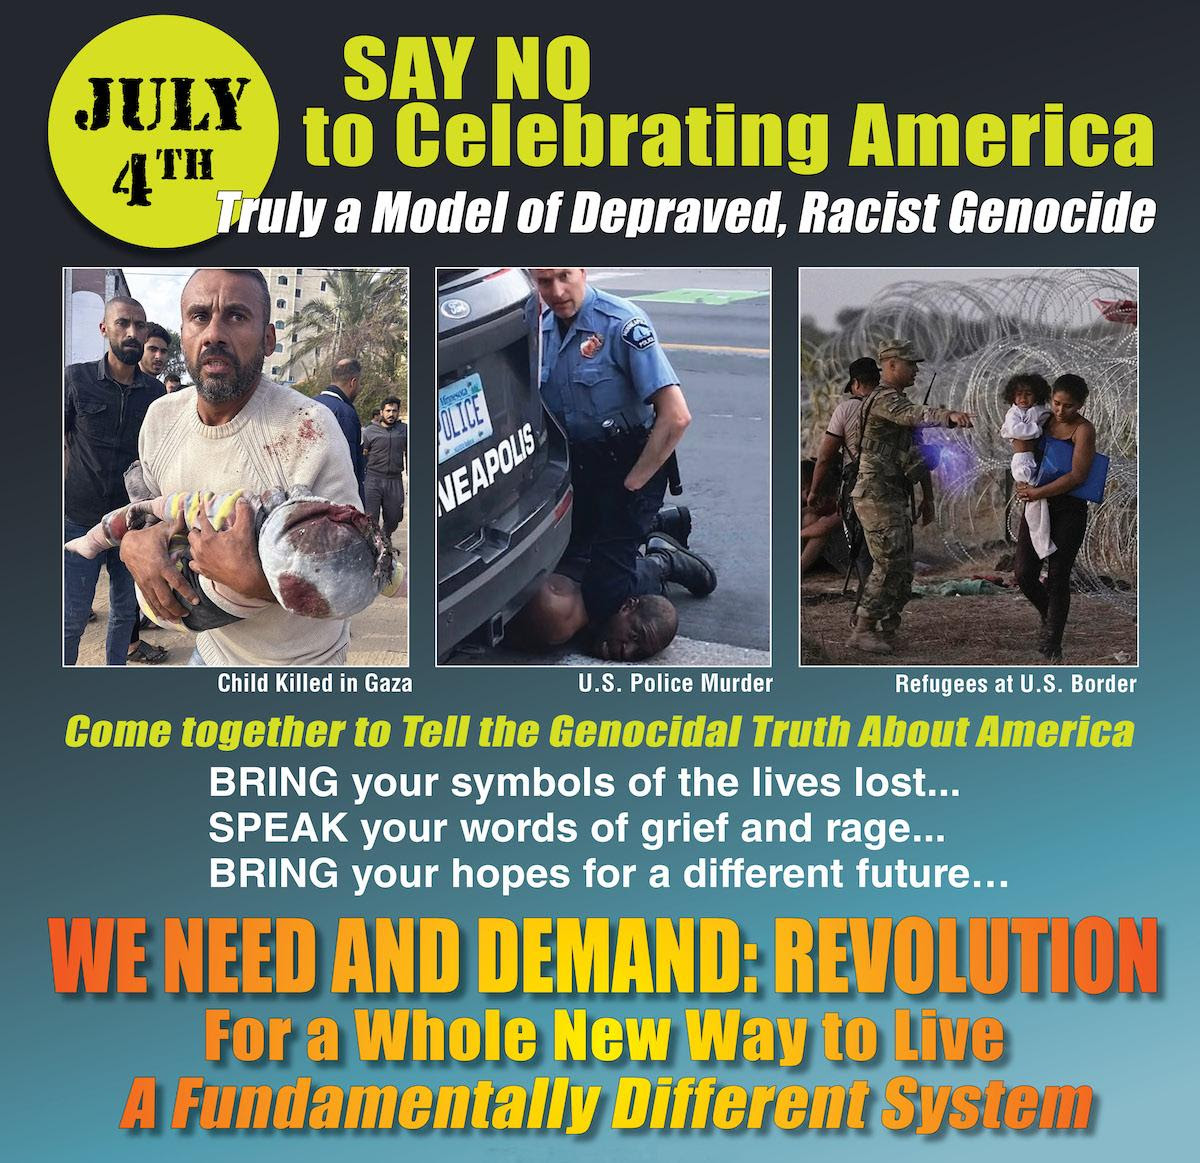 July 4th SAY NO to celebrating America ,truly a model of depraved, racist genocide.